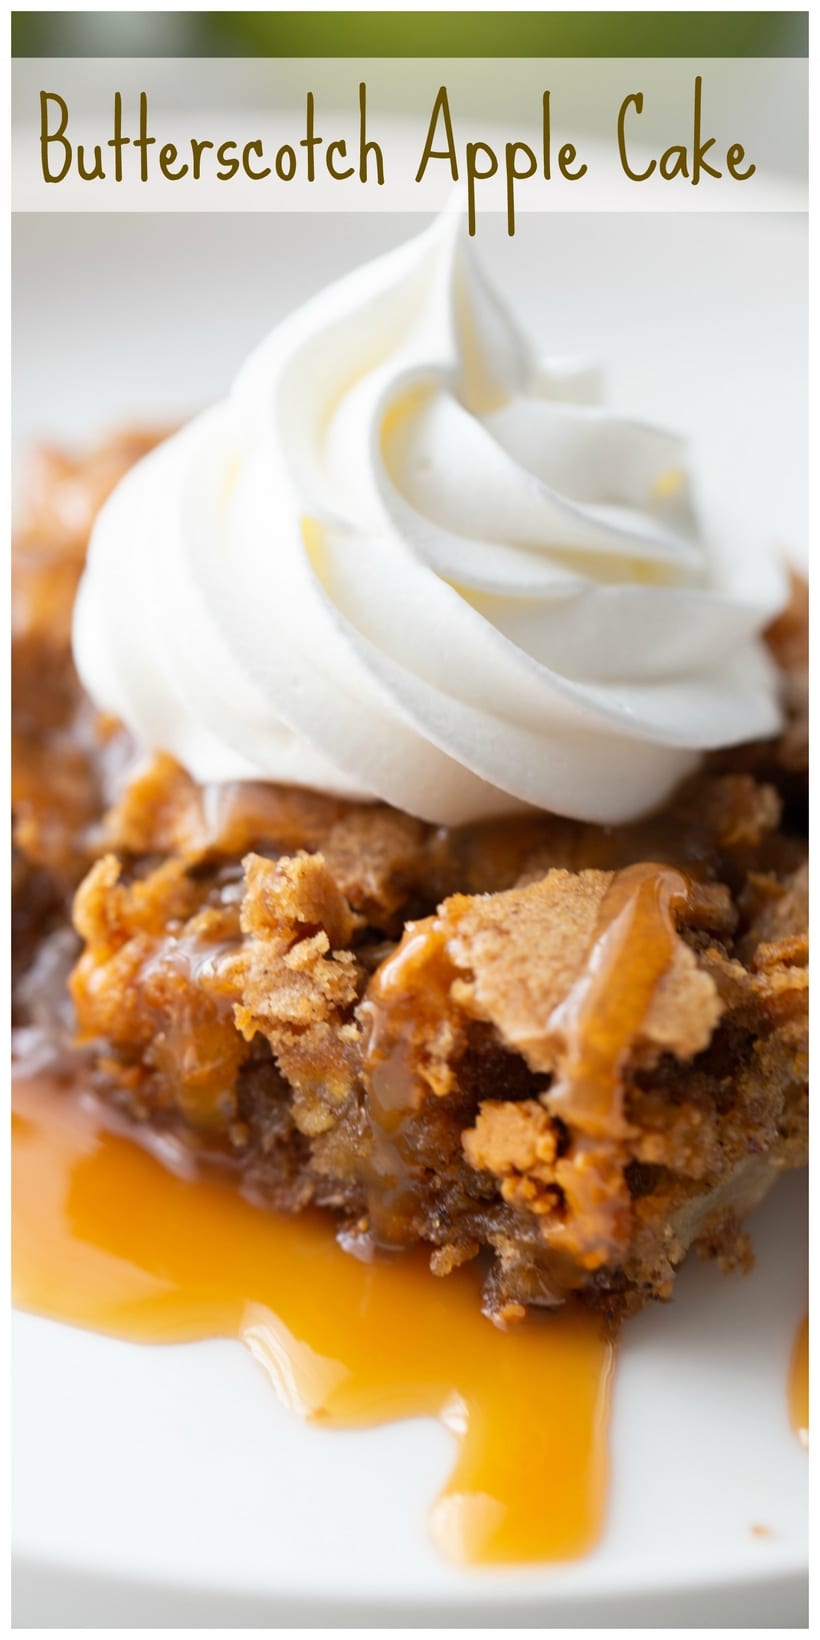 This light and airy apple cake filled with chunks of fresh apples and butterscotch morsels is the ultimate fall season dessert. Each slice finished with a drizzle of caramel and a dollop of whipped cream is decadence you need to experience. via @cmpollak1